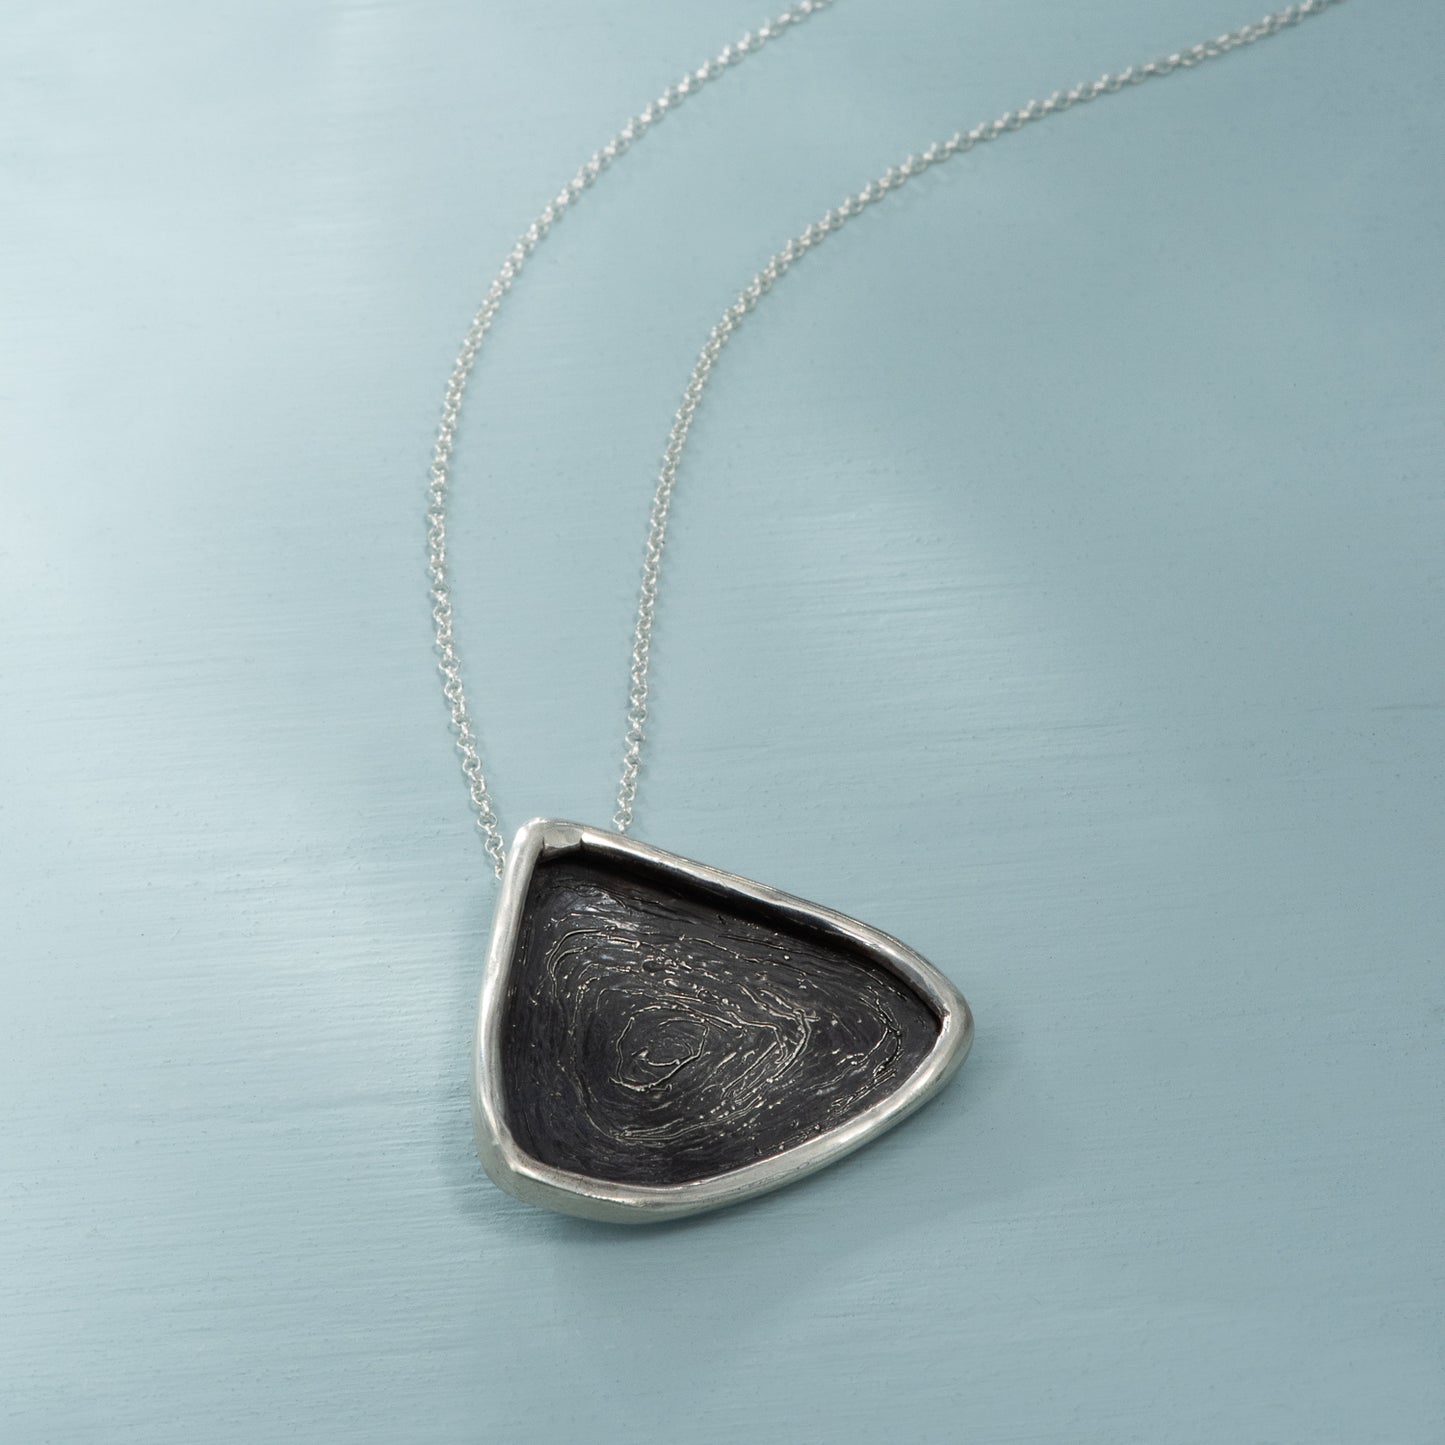 A large rounded triangular silver pendant, oxidized black with a thin ring of polished silver at the edges, on a long silver chain.